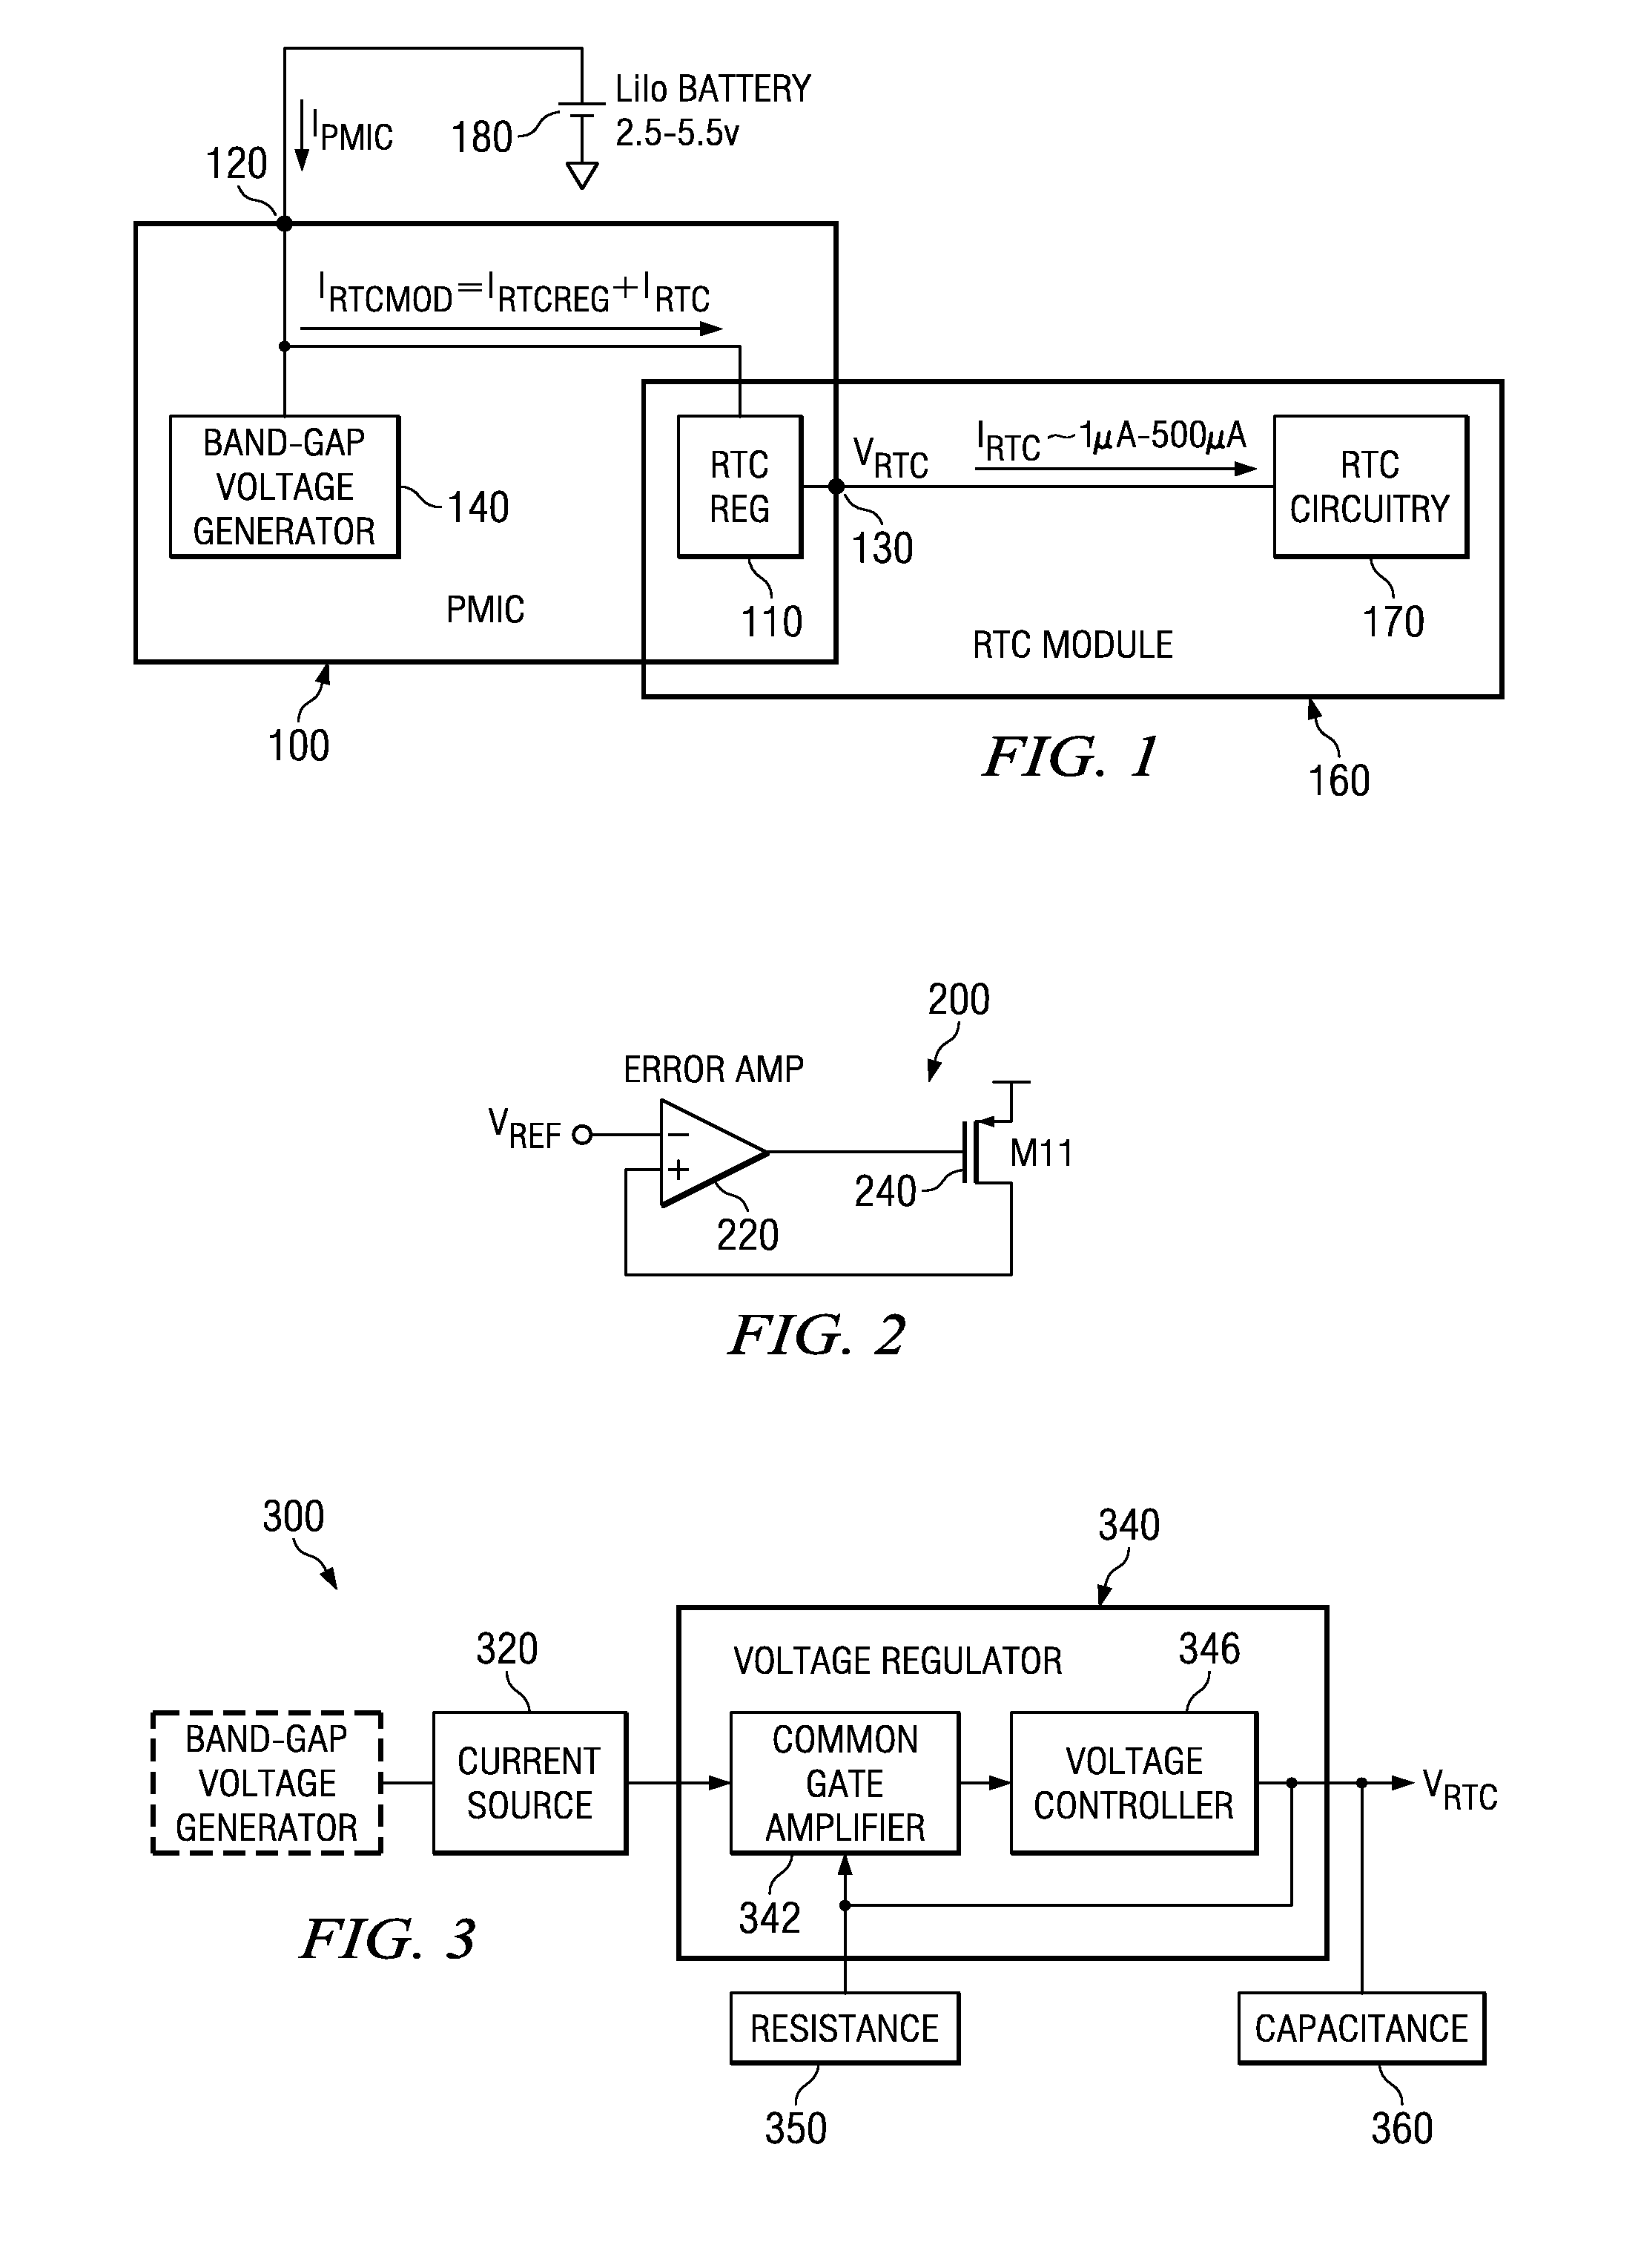 Real time clock (RTC) voltage regulator and method of regulating an rtc voltage